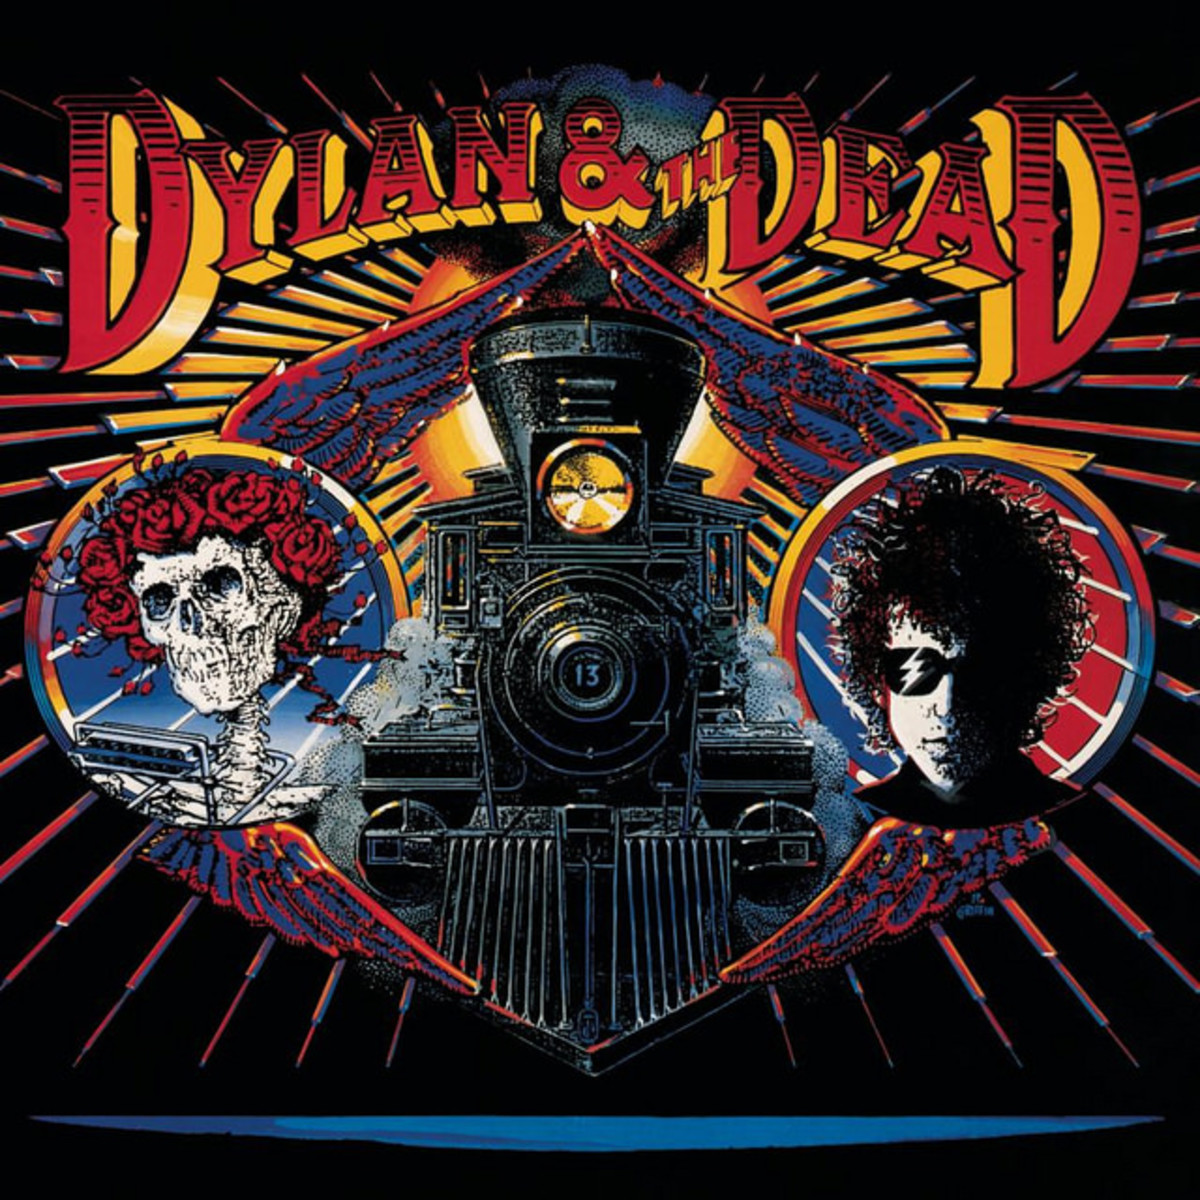 The Grateful Dead "Dylan and The Dead" Columbia Records C 45056 12" LP Vinyl Record, US pressing (1989) Album Cover Art by Rick Griffin